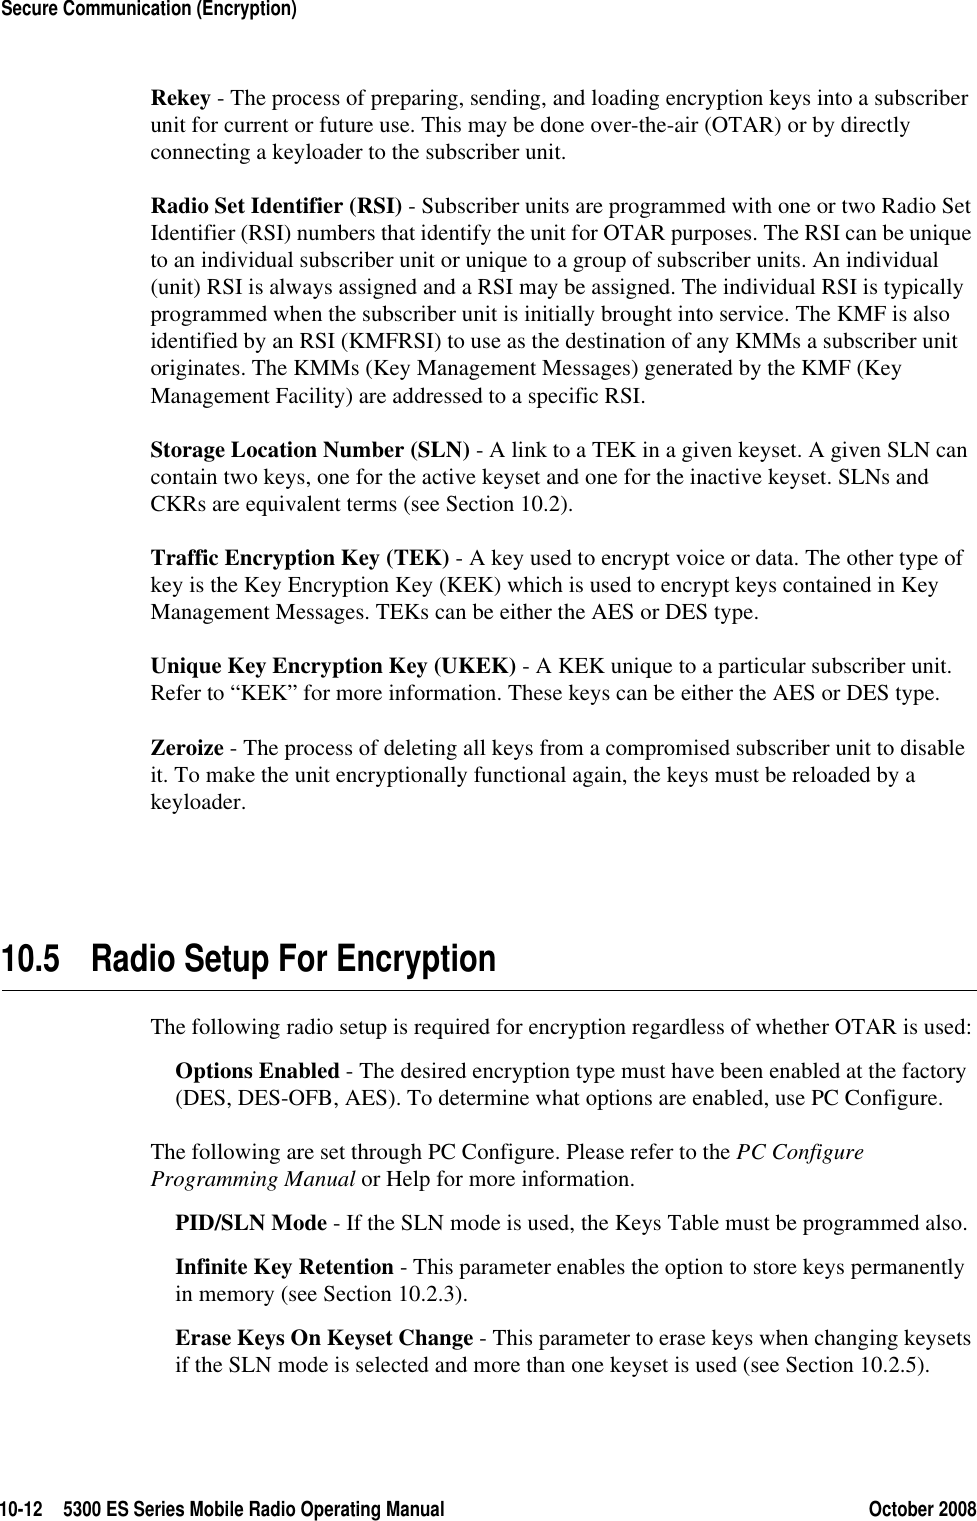 10-12 5300 ES Series Mobile Radio Operating Manual October 2008Secure Communication (Encryption)Rekey - The process of preparing, sending, and loading encryption keys into a subscriber unit for current or future use. This may be done over-the-air (OTAR) or by directly connecting a keyloader to the subscriber unit.Radio Set Identifier (RSI) - Subscriber units are programmed with one or two Radio Set Identifier (RSI) numbers that identify the unit for OTAR purposes. The RSI can be unique to an individual subscriber unit or unique to a group of subscriber units. An individual (unit) RSI is always assigned and a RSI may be assigned. The individual RSI is typically programmed when the subscriber unit is initially brought into service. The KMF is also identified by an RSI (KMFRSI) to use as the destination of any KMMs a subscriber unit originates. The KMMs (Key Management Messages) generated by the KMF (Key Management Facility) are addressed to a specific RSI. Storage Location Number (SLN) - A link to a TEK in a given keyset. A given SLN can contain two keys, one for the active keyset and one for the inactive keyset. SLNs and CKRs are equivalent terms (see Section 10.2).Traffic Encryption Key (TEK) - A key used to encrypt voice or data. The other type of key is the Key Encryption Key (KEK) which is used to encrypt keys contained in Key Management Messages. TEKs can be either the AES or DES type.Unique Key Encryption Key (UKEK) - A KEK unique to a particular subscriber unit. Refer to “KEK” for more information. These keys can be either the AES or DES type.Zeroize - The process of deleting all keys from a compromised subscriber unit to disable it. To make the unit encryptionally functional again, the keys must be reloaded by a keyloader.10.5 Radio Setup For EncryptionThe following radio setup is required for encryption regardless of whether OTAR is used:Options Enabled - The desired encryption type must have been enabled at the factory (DES, DES-OFB, AES). To determine what options are enabled, use PC Configure.The following are set through PC Configure. Please refer to the PC Configure Programming Manual or Help for more information.PID/SLN Mode - If the SLN mode is used, the Keys Table must be programmed also.Infinite Key Retention - This parameter enables the option to store keys permanently in memory (see Section 10.2.3).Erase Keys On Keyset Change - This parameter to erase keys when changing keysets if the SLN mode is selected and more than one keyset is used (see Section 10.2.5).